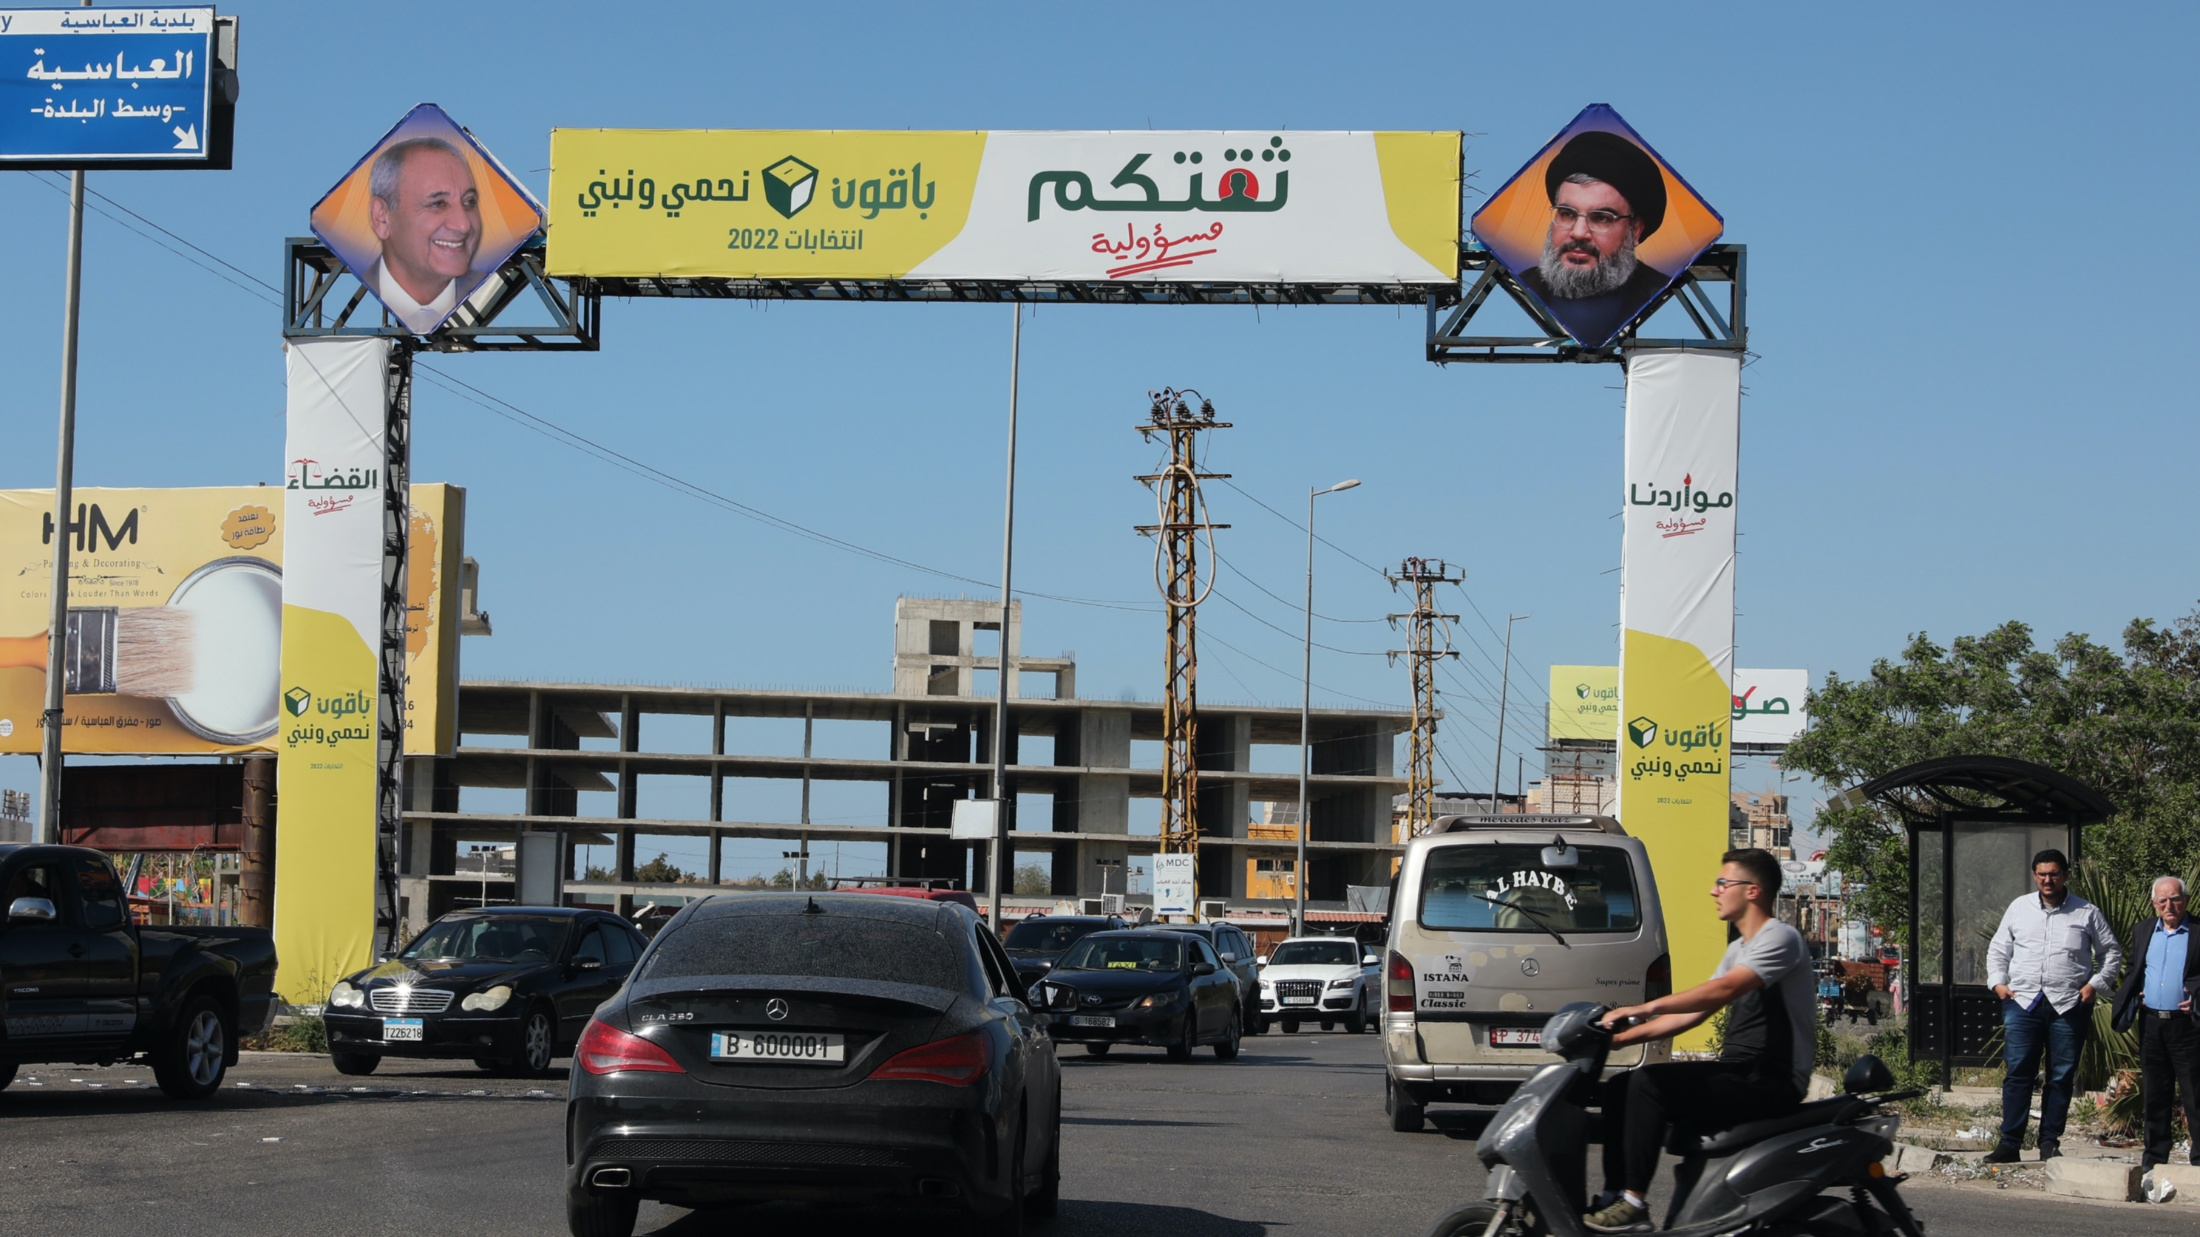 A banner in Abbasiyeh reads “your trust is our responsibility” and displays photos of Amal Movement leader Nabih Berri and Hezbollah leader Hassan Nasrallah (MEE/Hasan Shaaban)